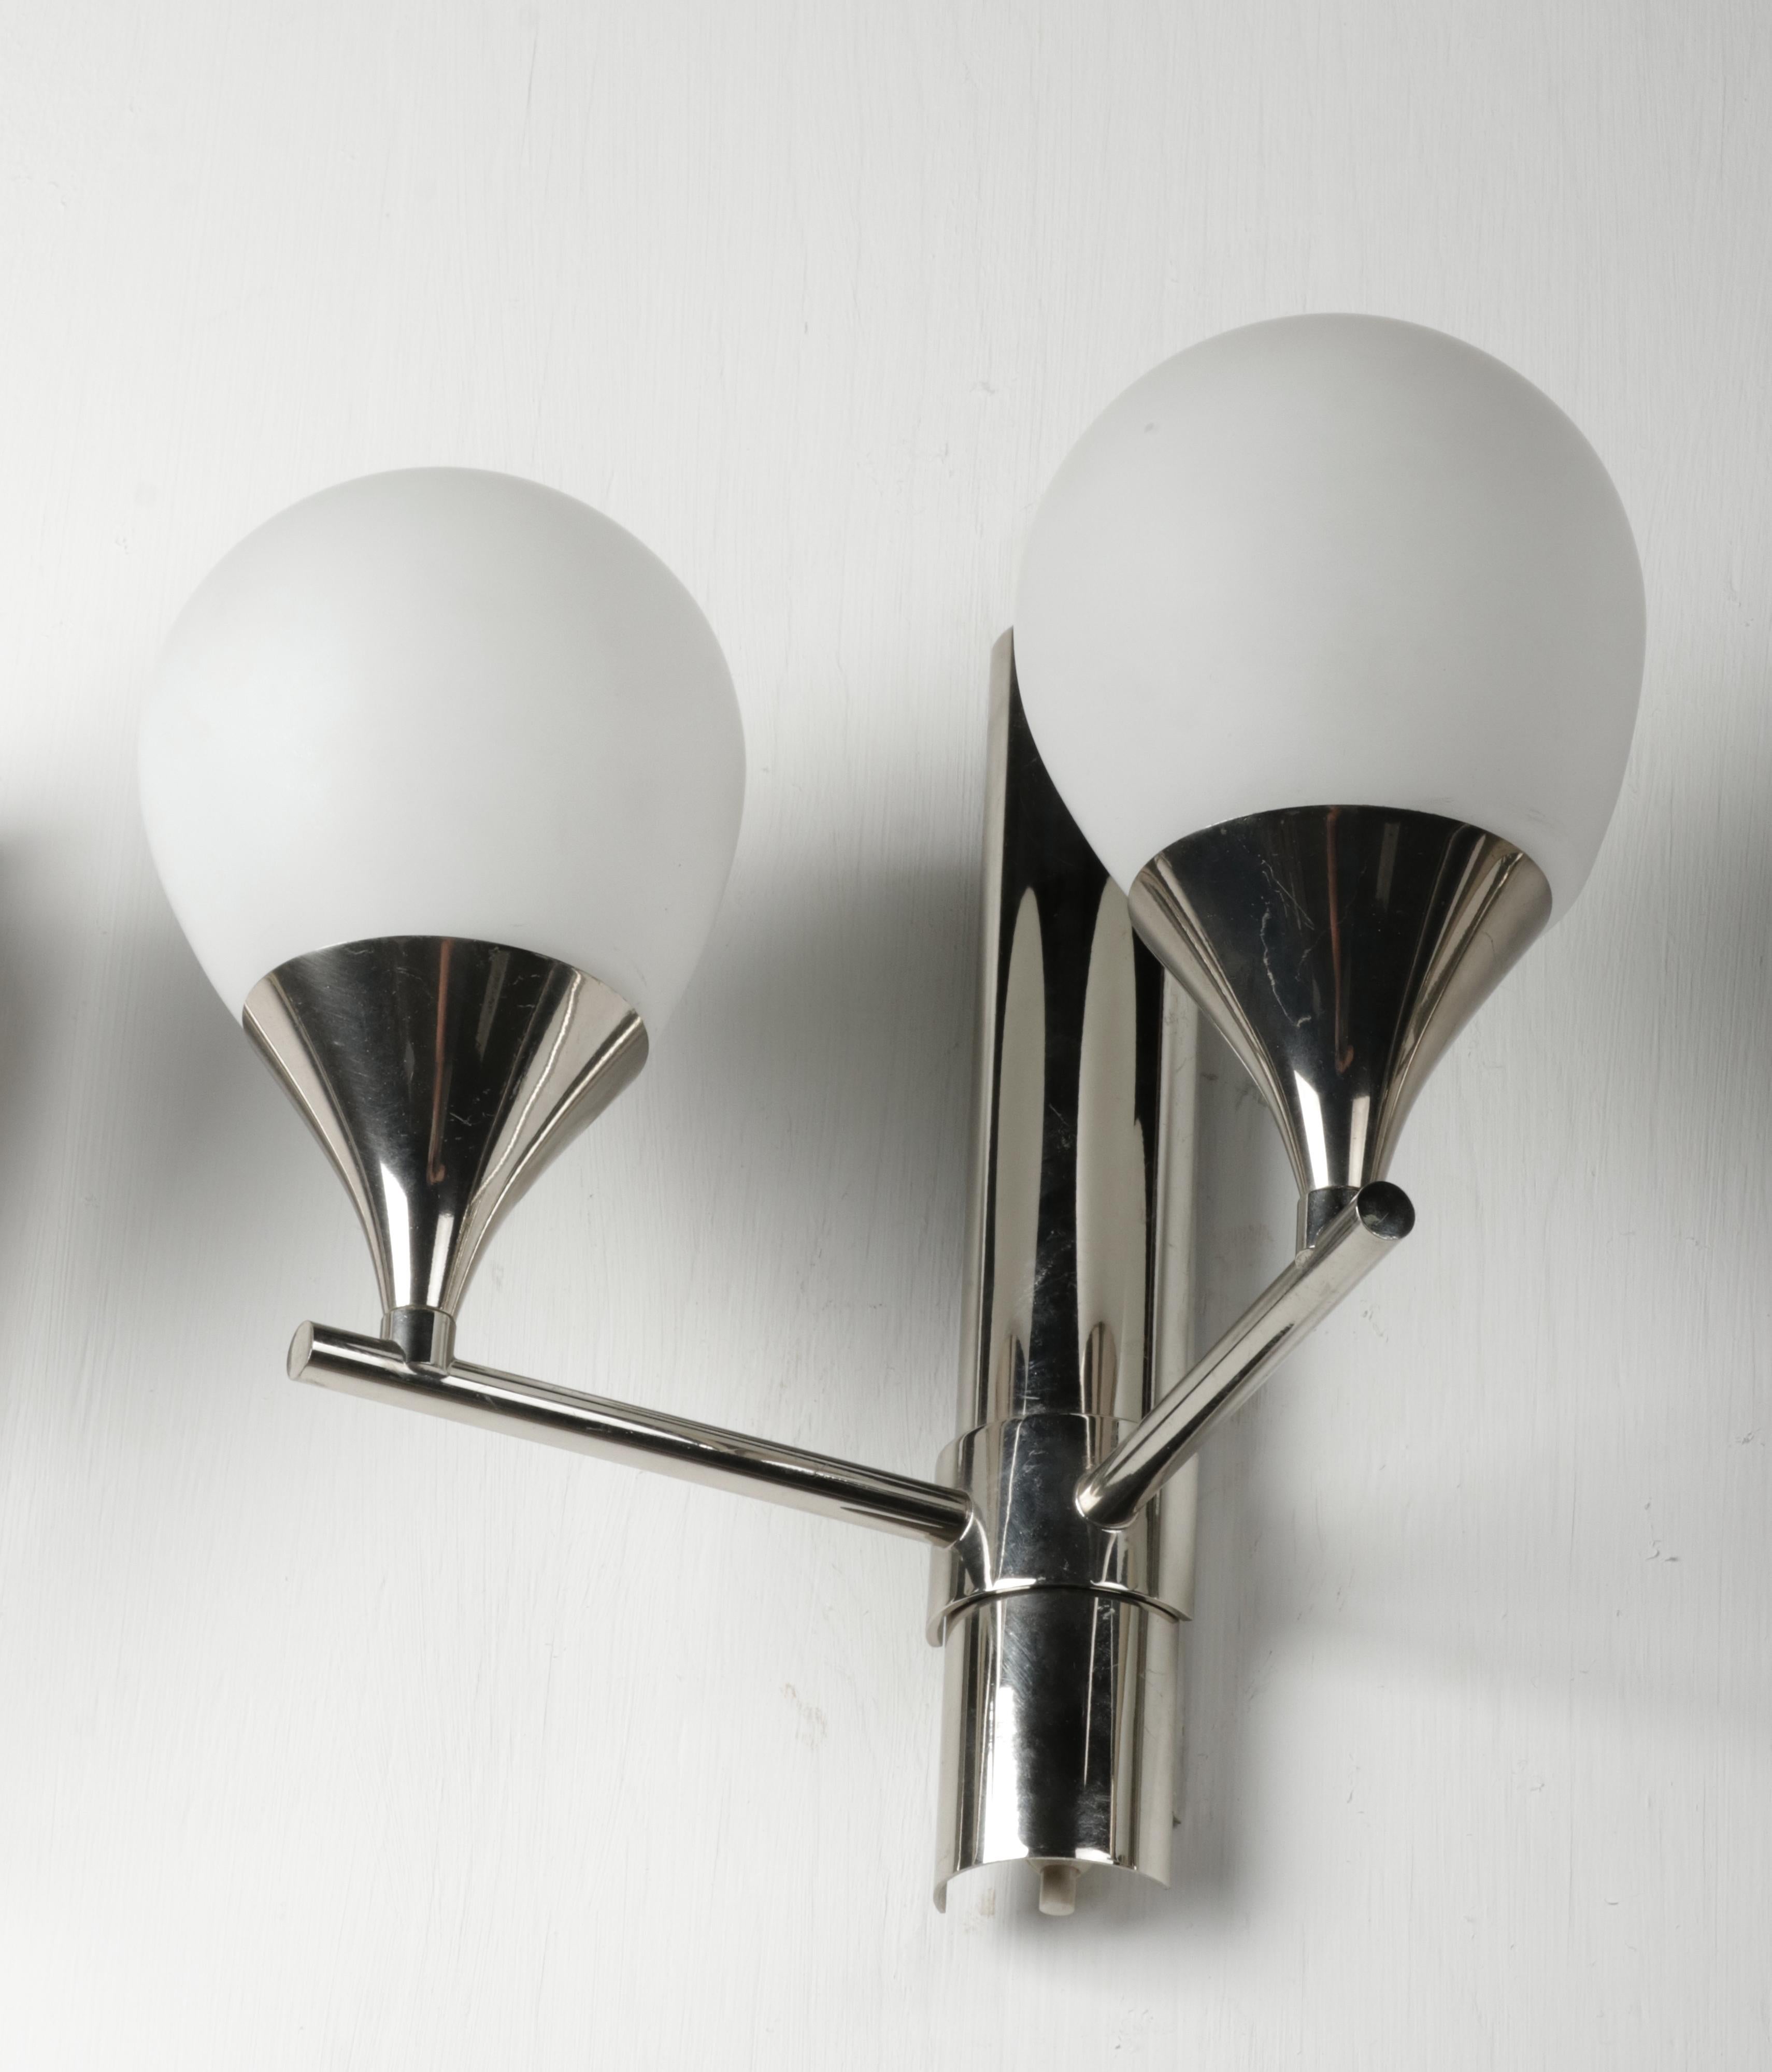 Set of Four Mid-Century Modern Chrome Plated Sconces / Wall Lights For Sale 6